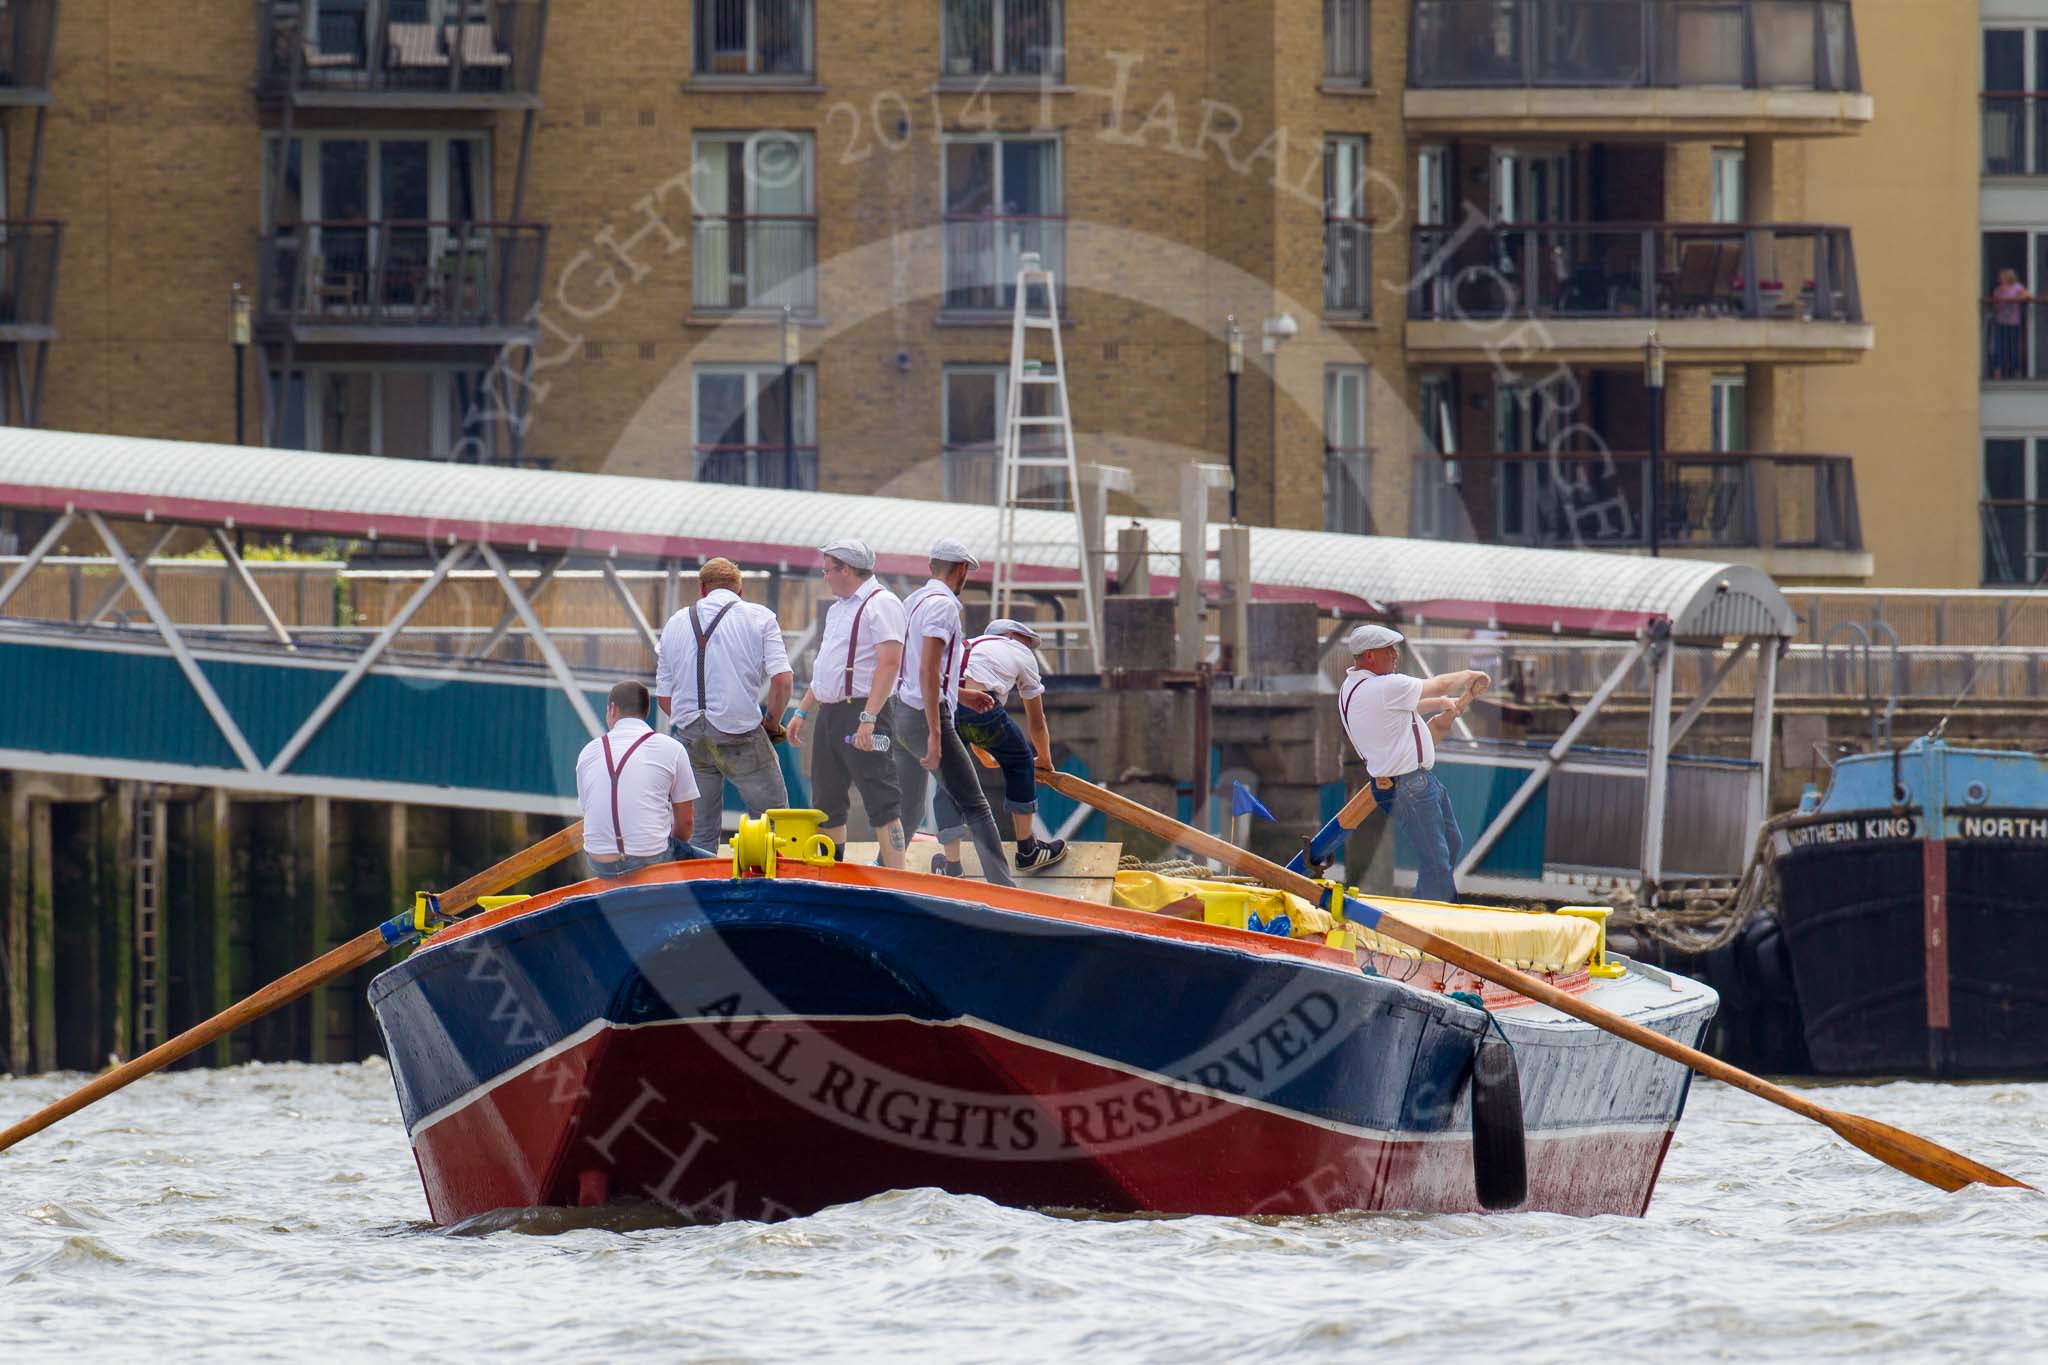 TOW River Thames Barge Driving Race 2014.
River Thames between Greenwich and Westminster,
London,

United Kingdom,
on 28 June 2014 at 12:51, image #152